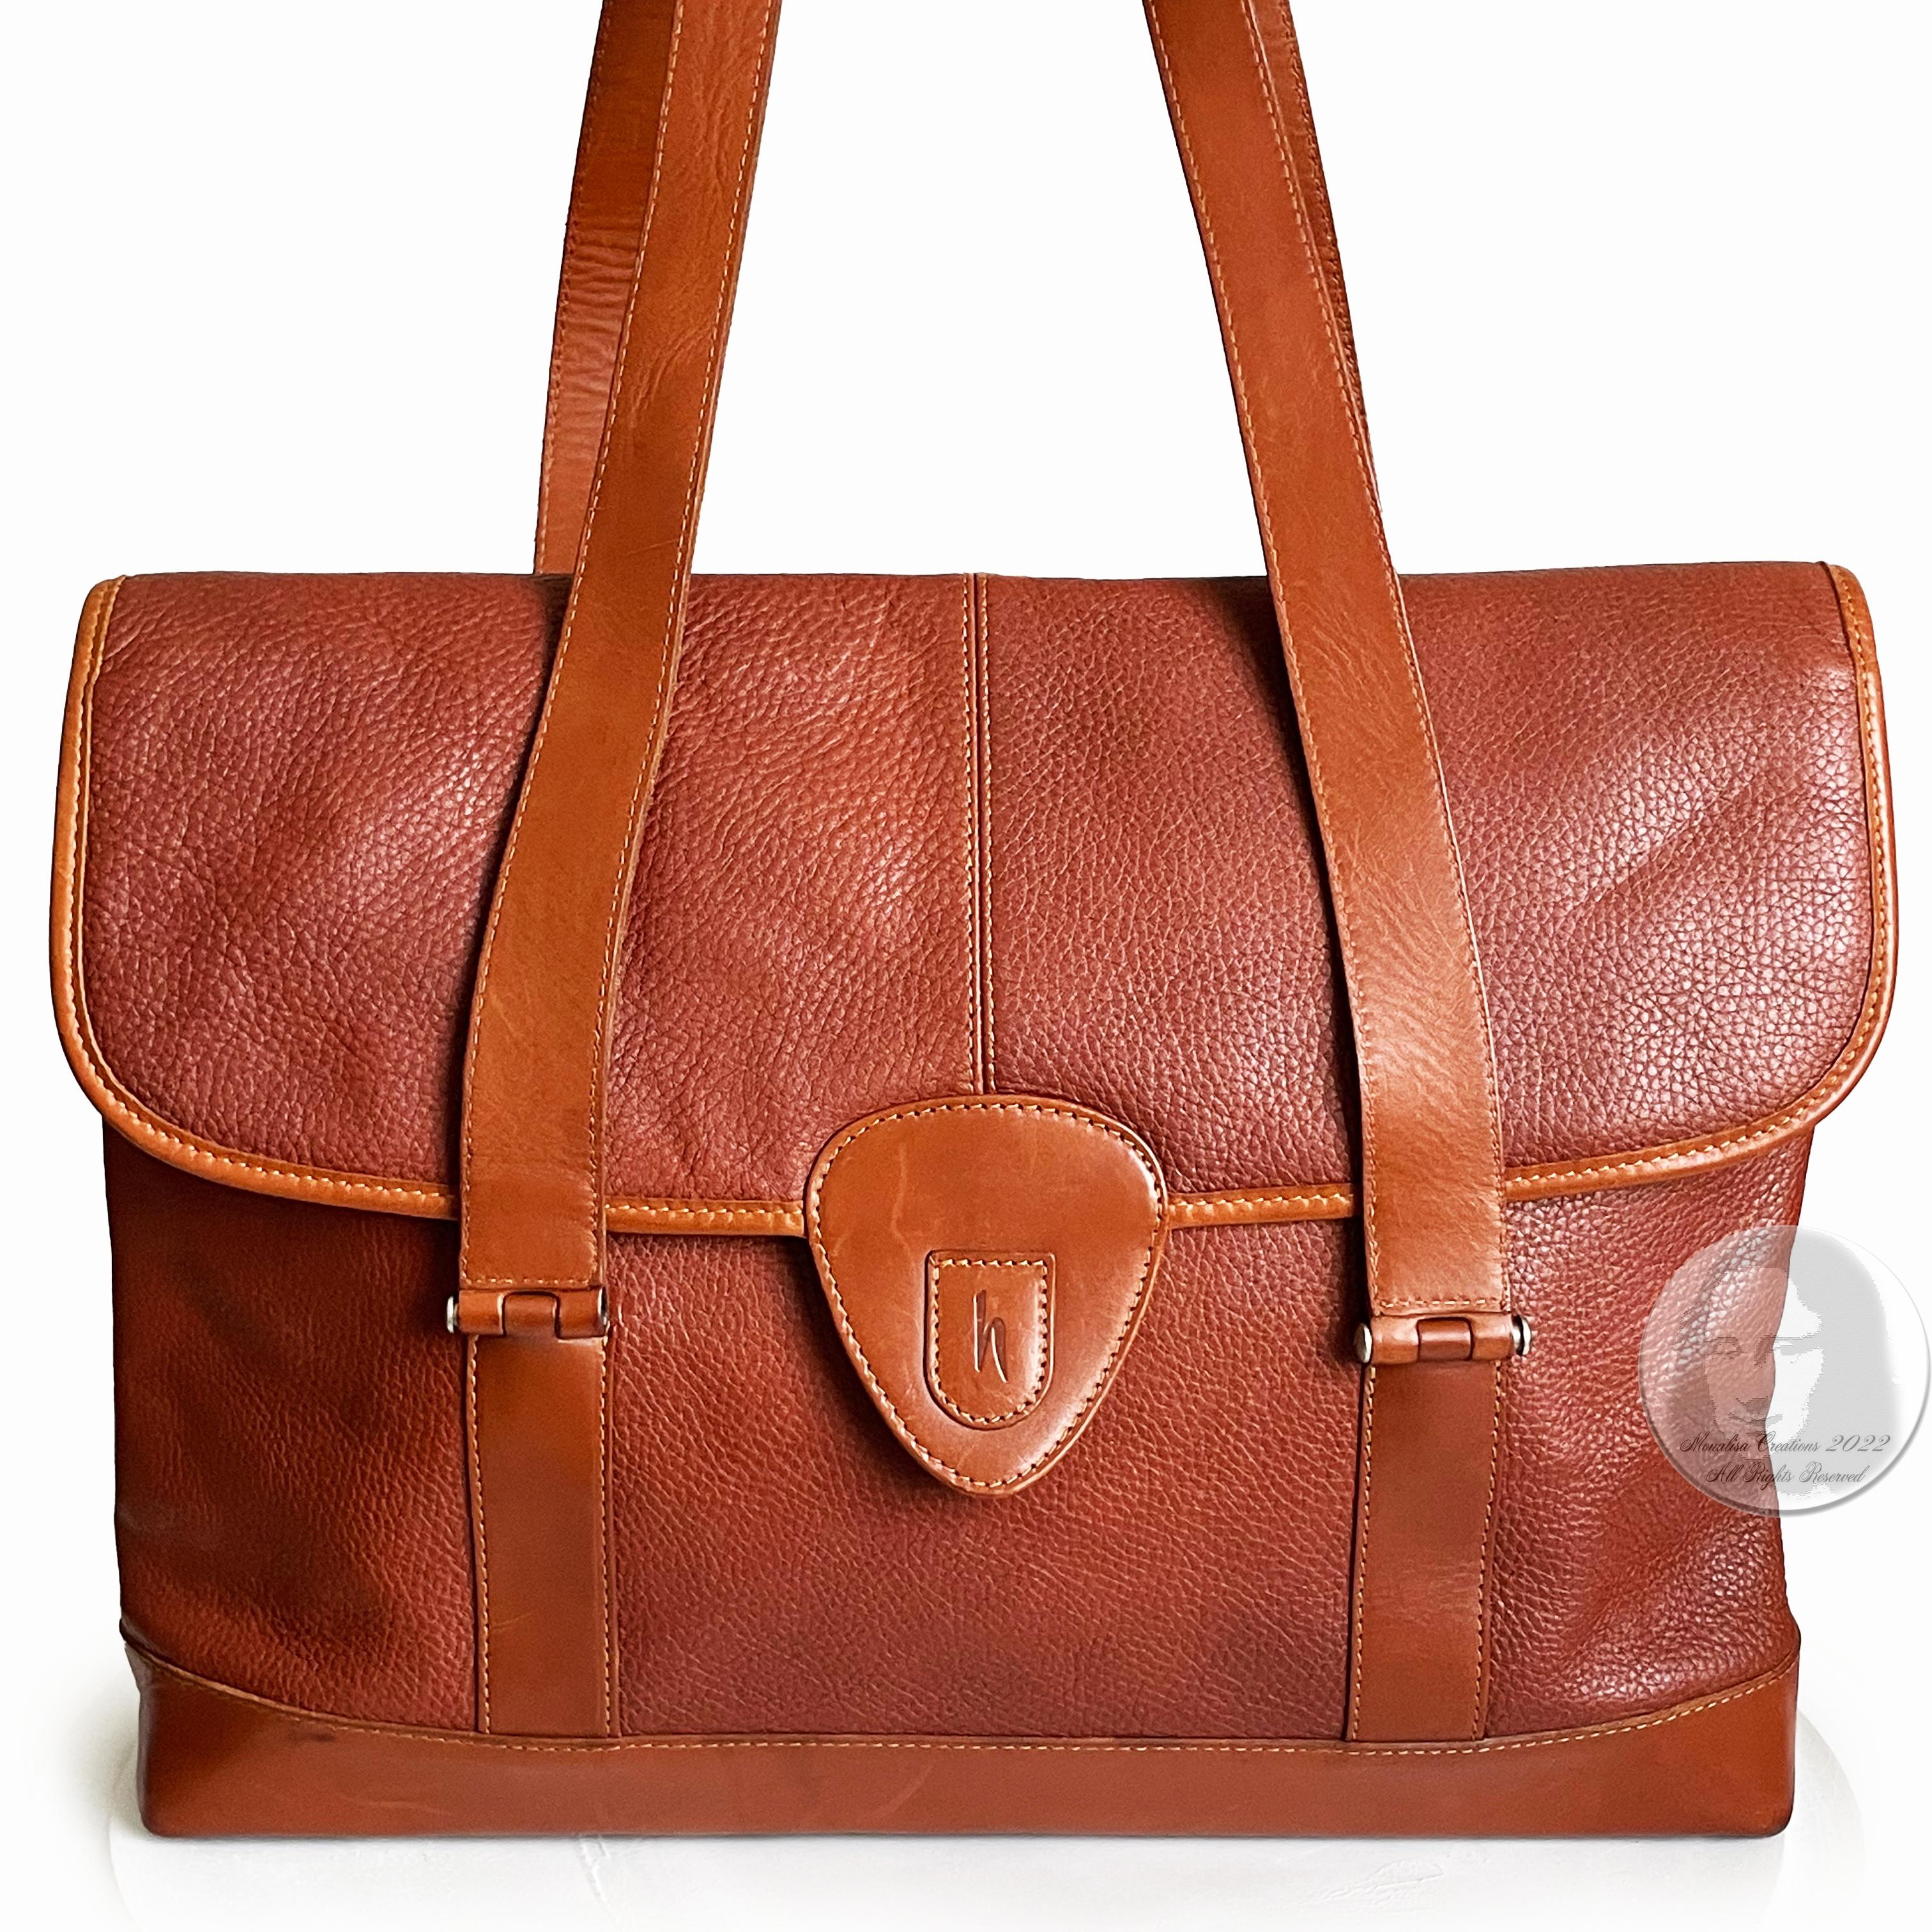 Authentic, preowned, vintage Hartmann business bag soft leather briefcase or computer bag, likely made in the 2000s. Made from a gorgeous pebbled British tan leather, it's trimmed in smooth belting leather and fastens with a snap on the top flap.